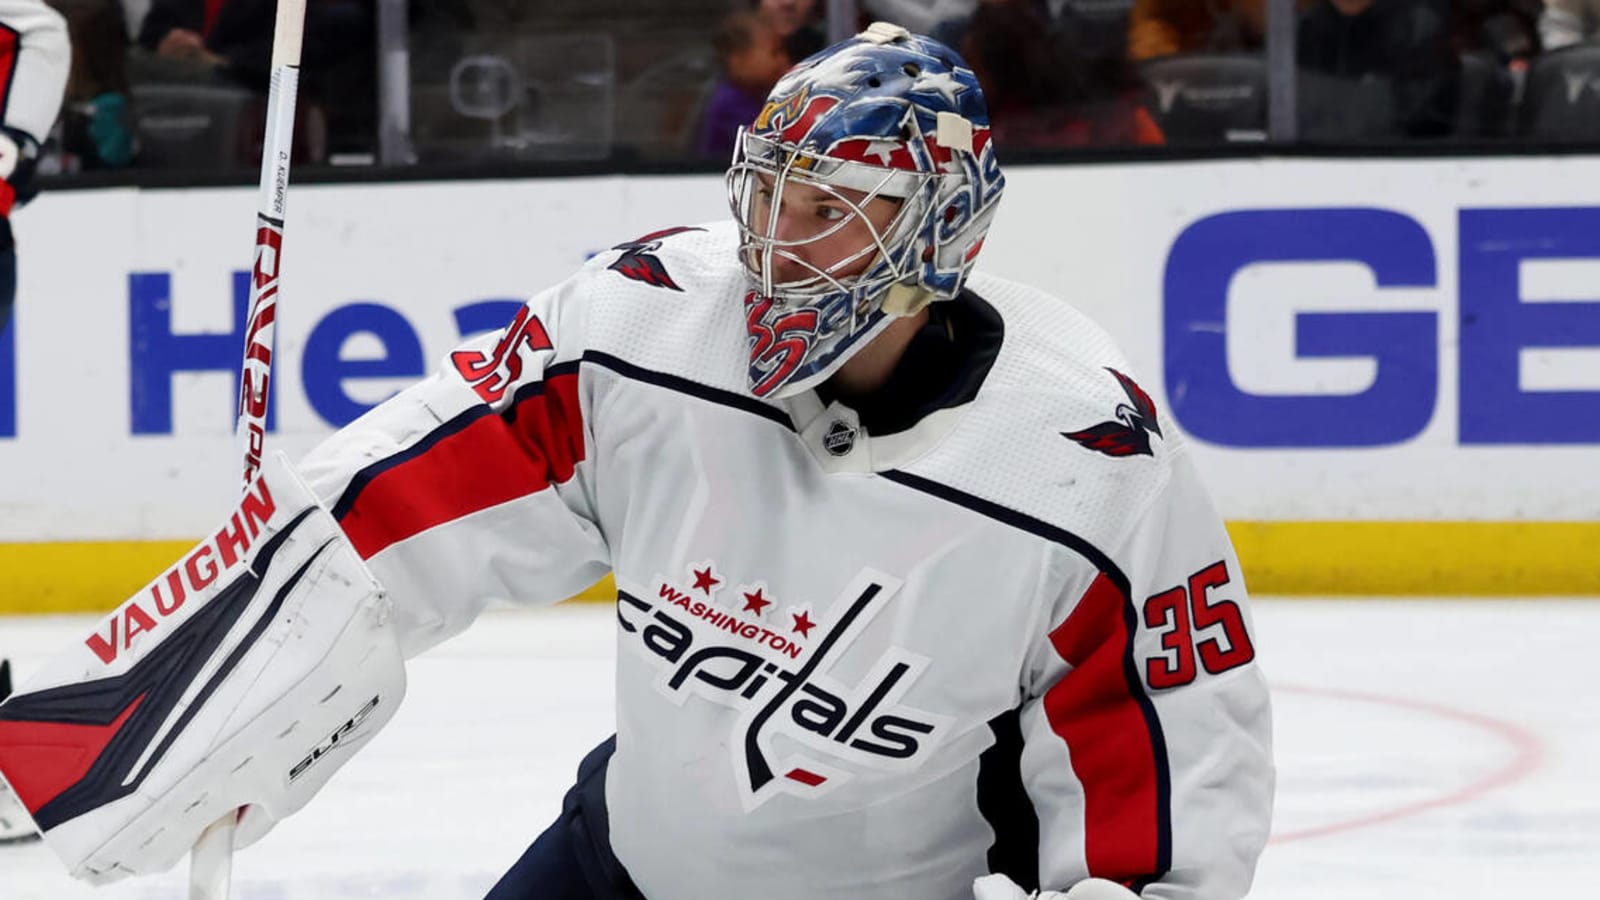 Capitals goalie Darcy Kuemper day-to-day with upper-body injury